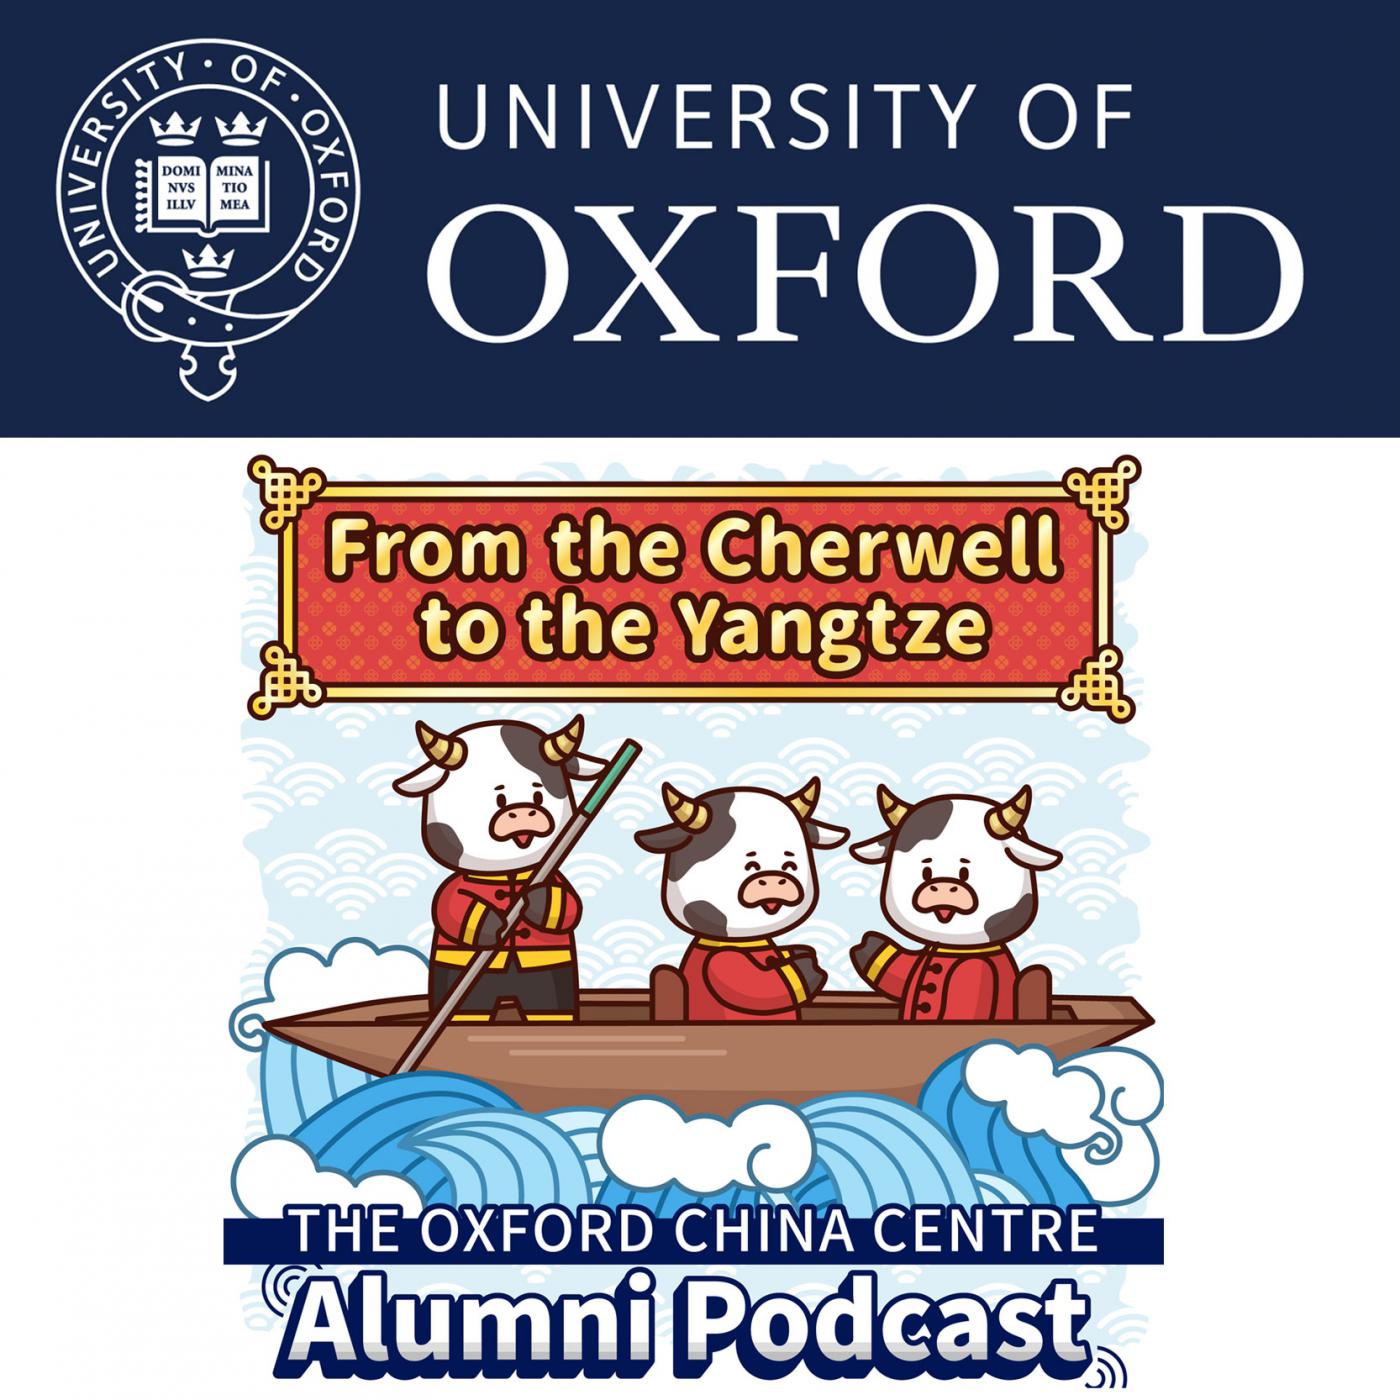 From the Cherwell to the Yangtze: The Oxford China Centre Alumni Podcast